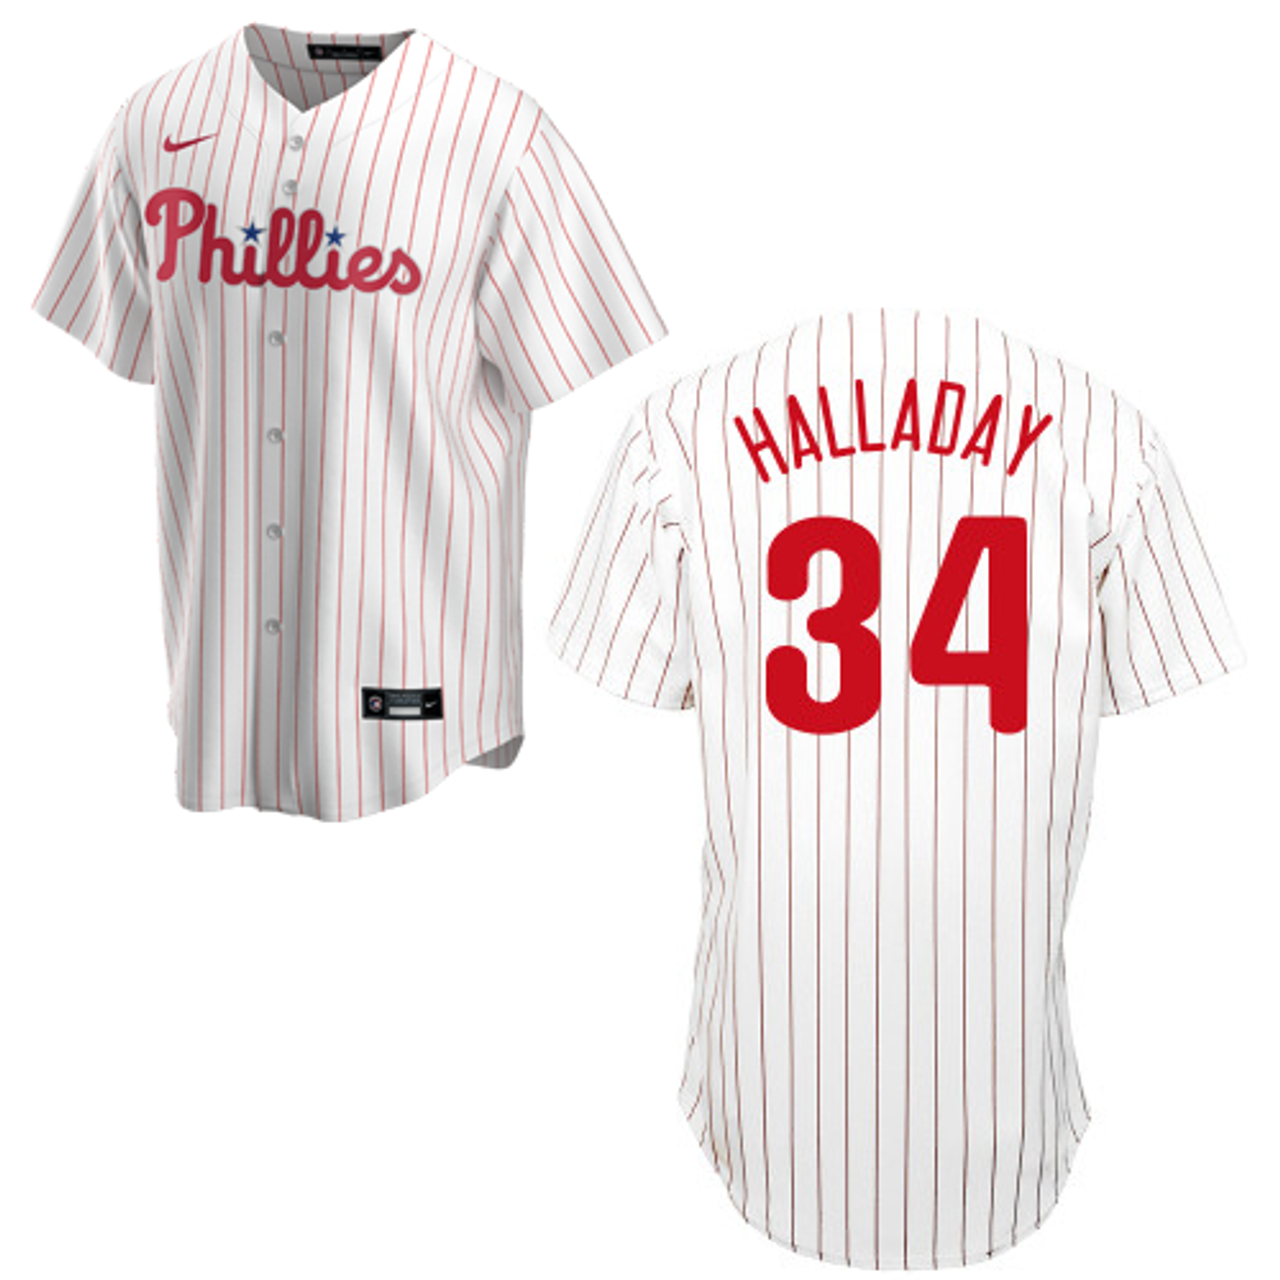 Roy Halladay Youth Jersey - Philadelphia Phillies Youth Home Jersey